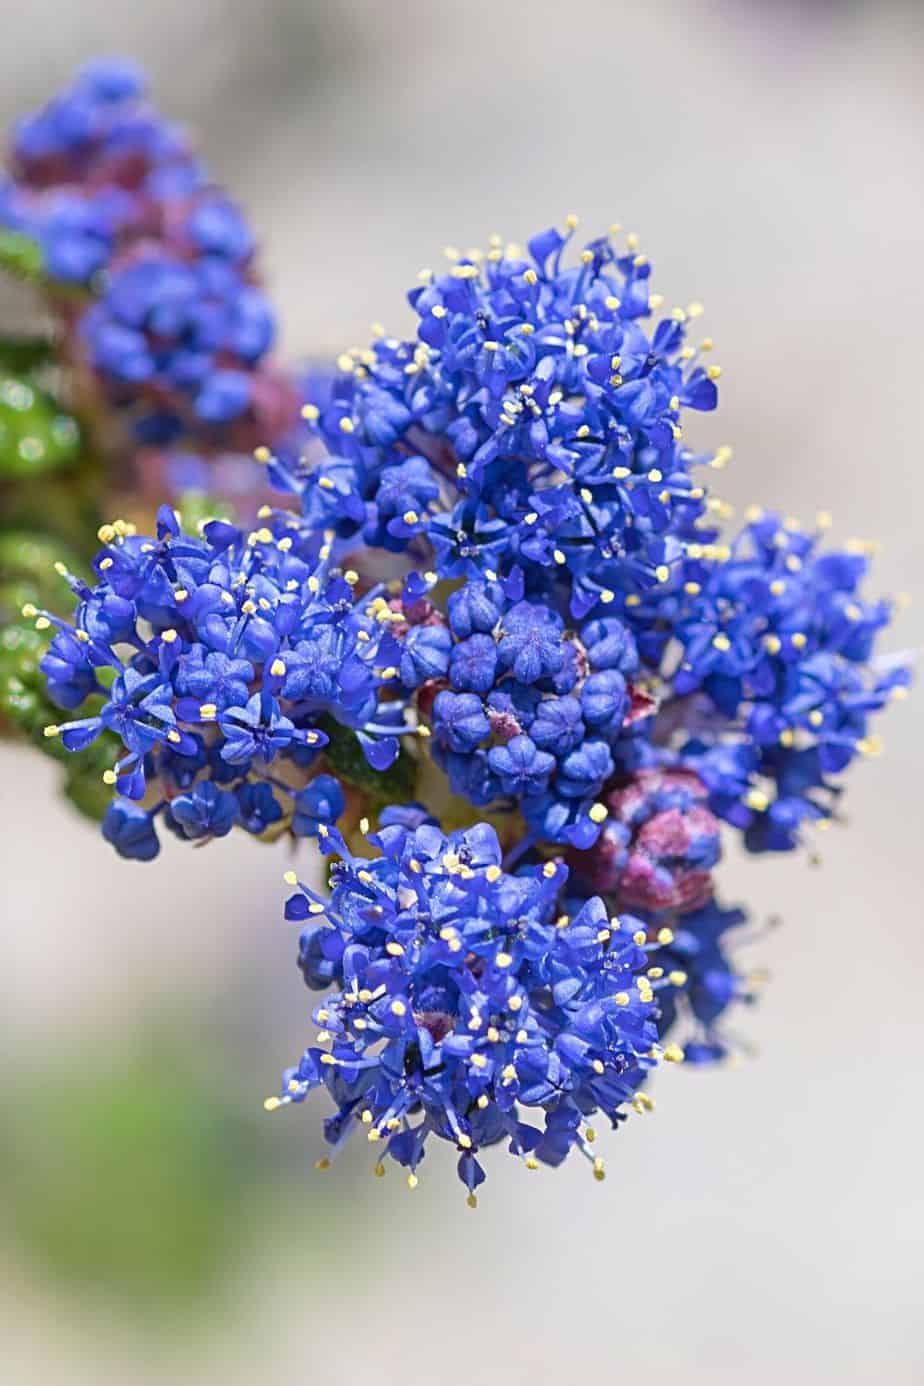 The west-facing side of the house is where you should plant your Ceanothus as it can shield the plant from cold, direct winds